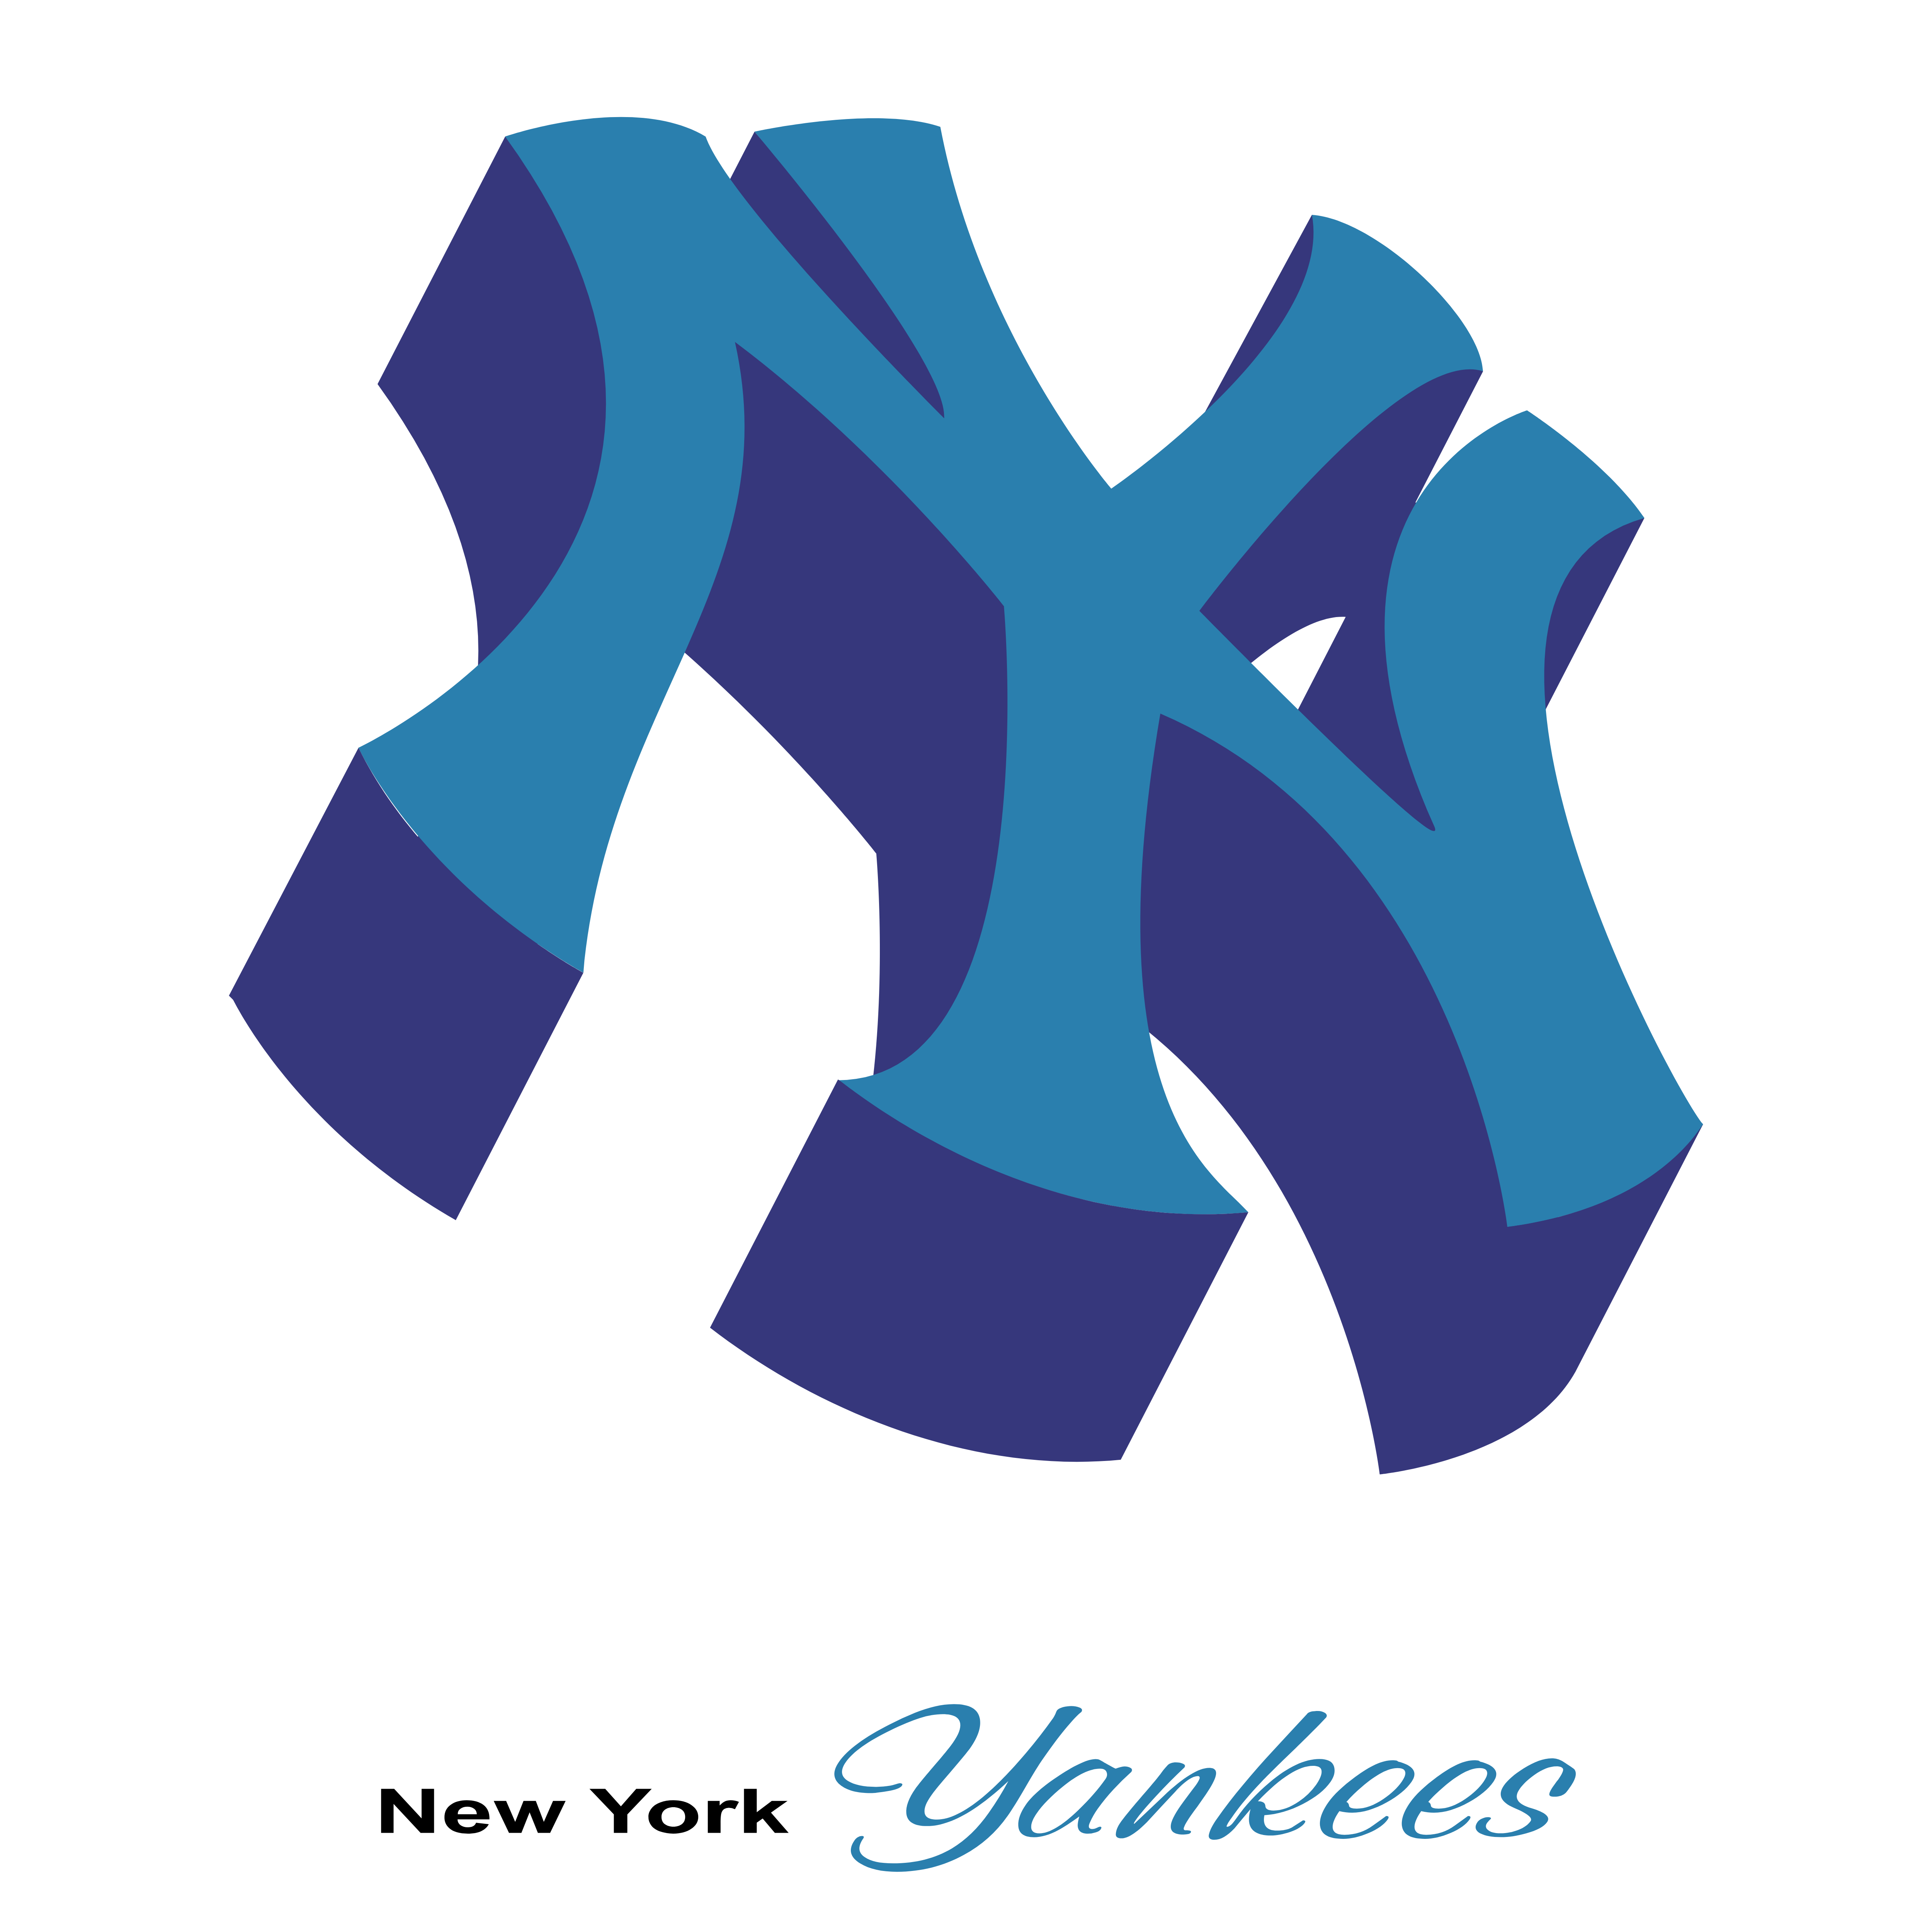 New York Yankees Logo And Symbol, Meaning, History, PNG, Brand | tyello.com